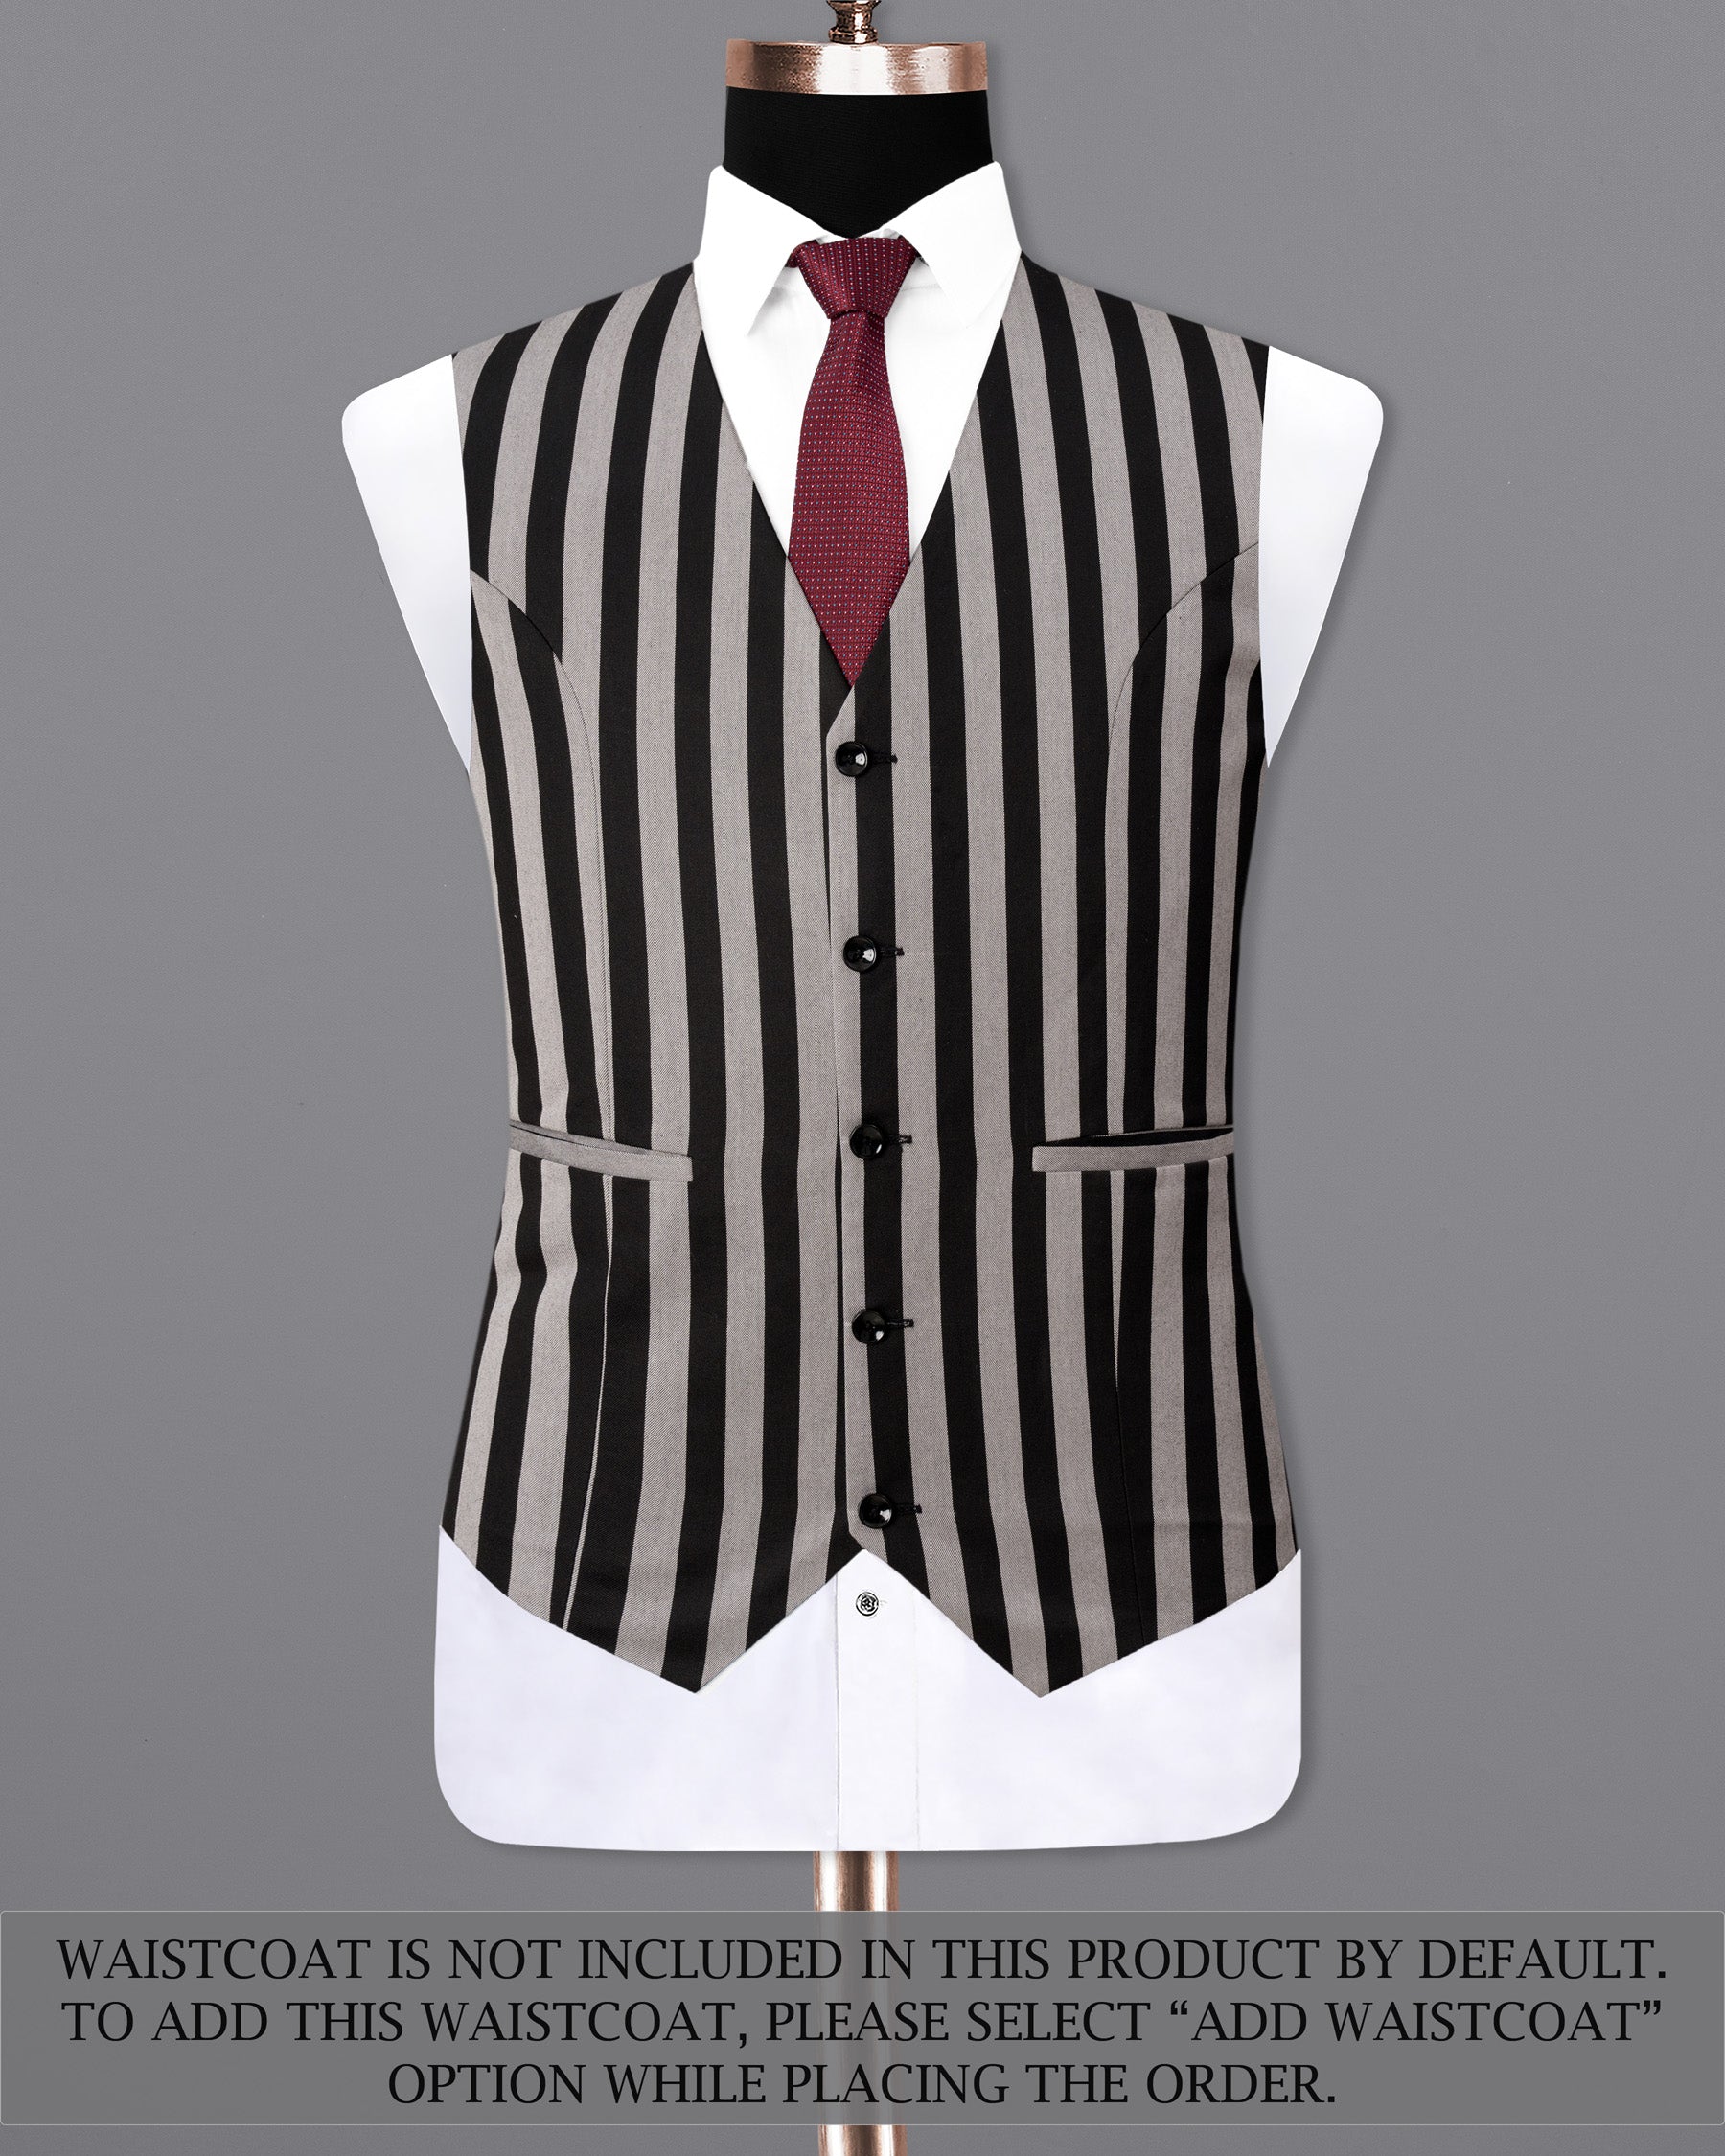 Nobel Grey with Black Striped Double Breasted Suit ST1781-DB-GB-36, ST1781-DB-GB-38, ST1781-DB-GB-40, ST1781-DB-GB-42, ST1781-DB-GB-44, ST1781-DB-GB-46, ST1781-DB-GB-48, ST1781-DB-GB-50, ST1781-DB-GB-52, ST1781-DB-GB-54, ST1781-DB-GB-56, ST1781-DB-GB-58, ST1781-DB-GB-60